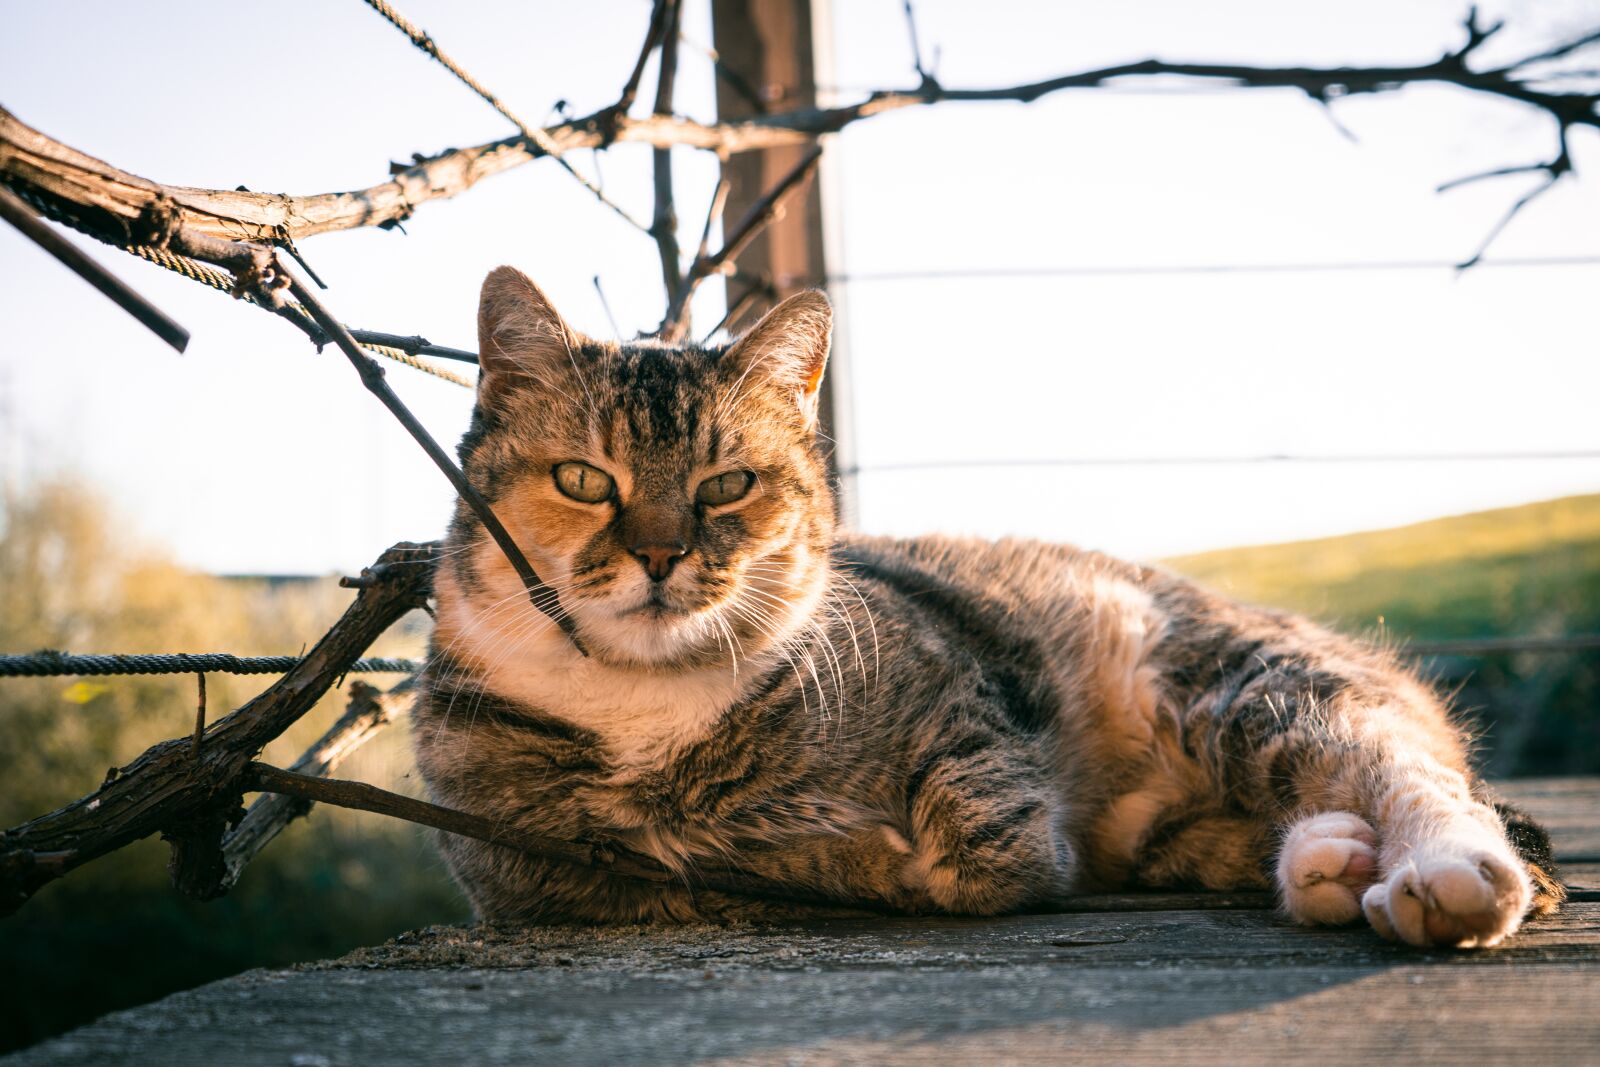 Sony a6500 + Sony FE 28-70mm F3.5-5.6 OSS sample photo. Spring, cat, nature photography